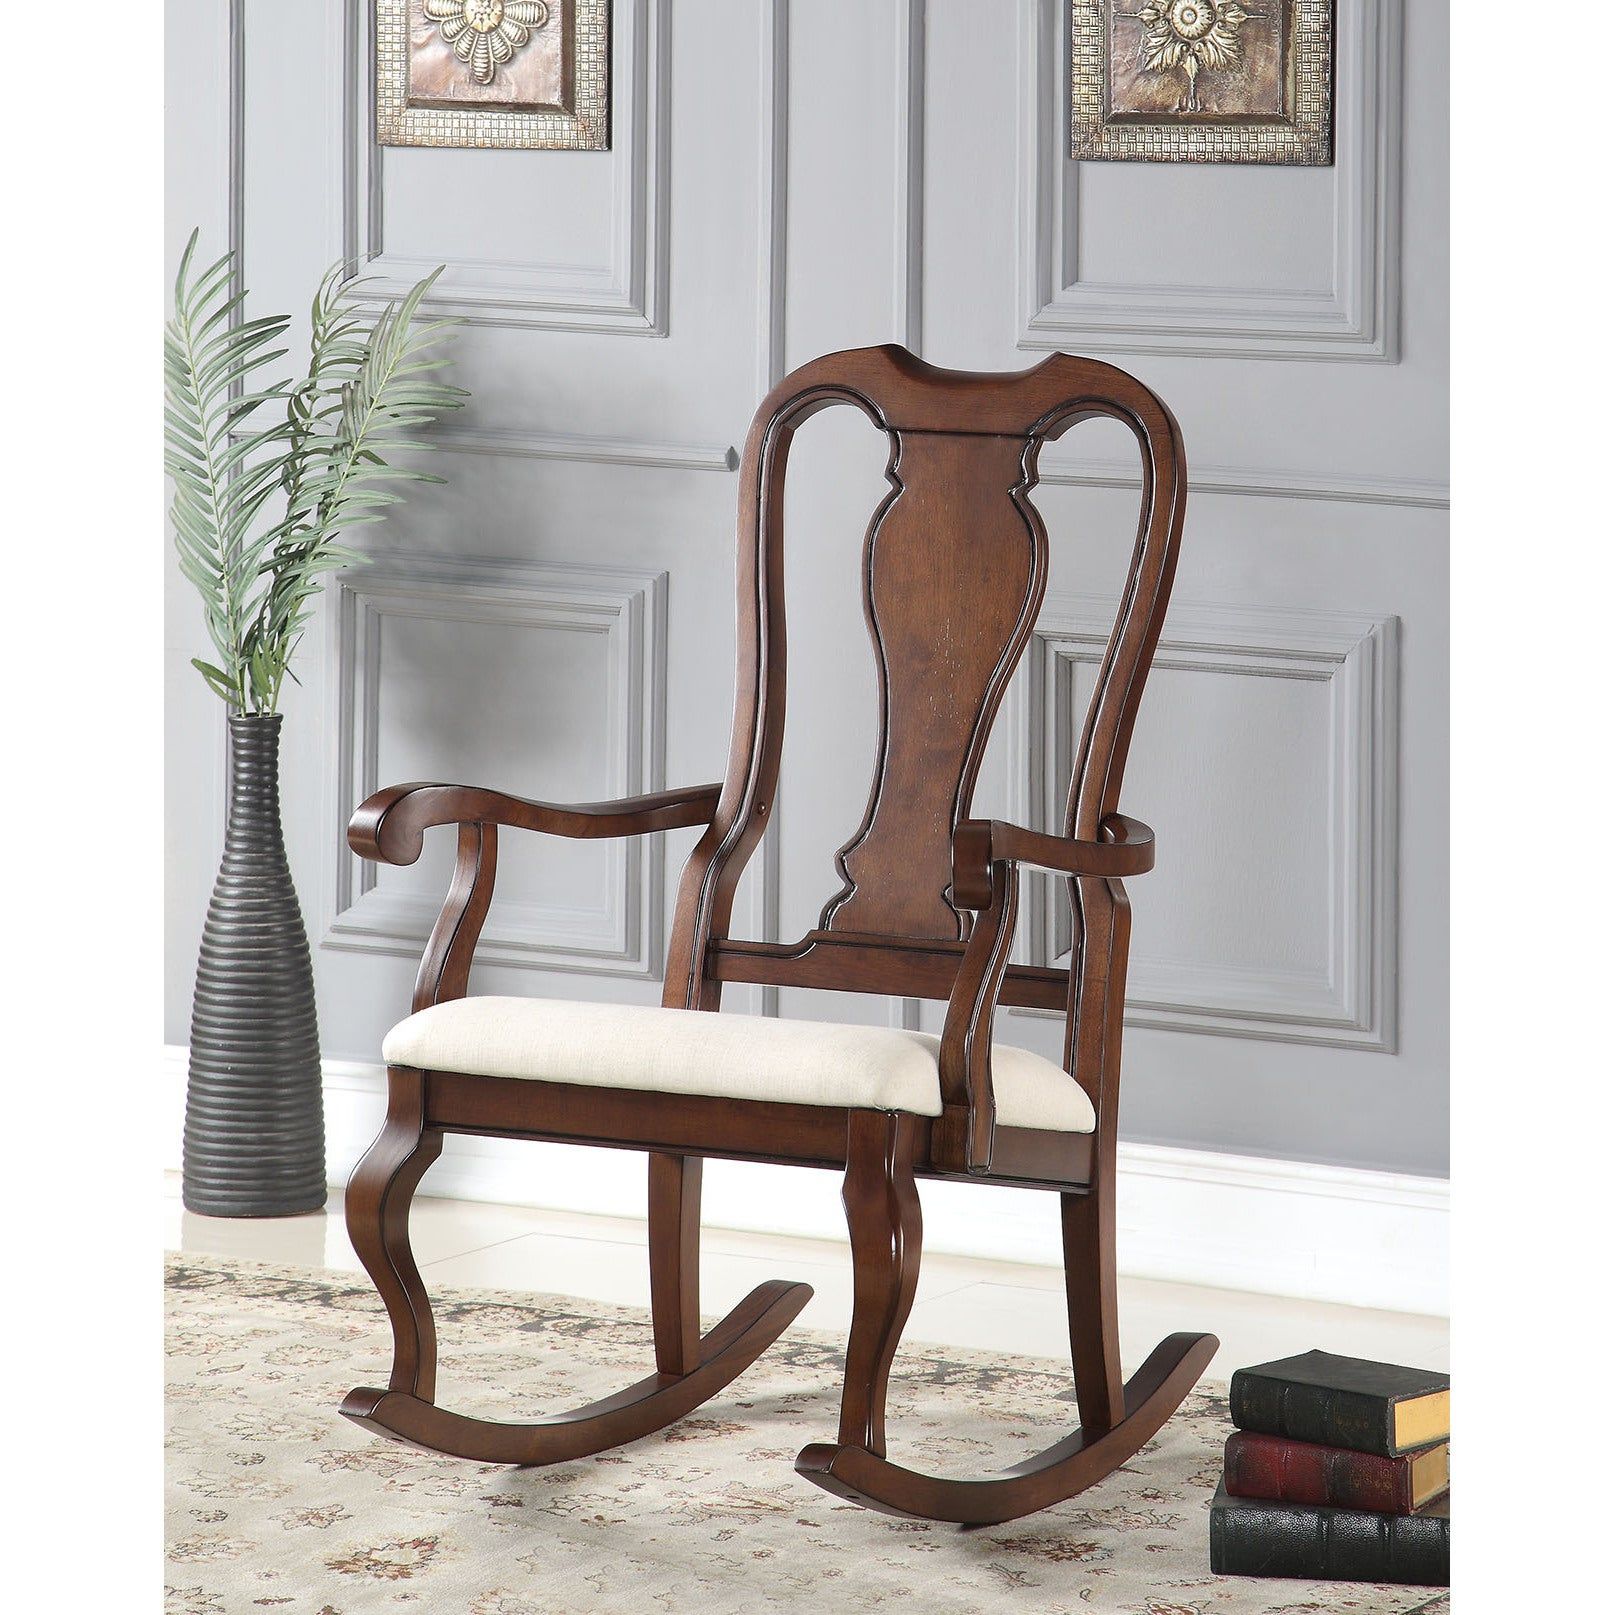 Buy Rocking Chairs, Traditional Living Room Chairs Online At In Judson Traditional Rocking Chairs (View 8 of 20)